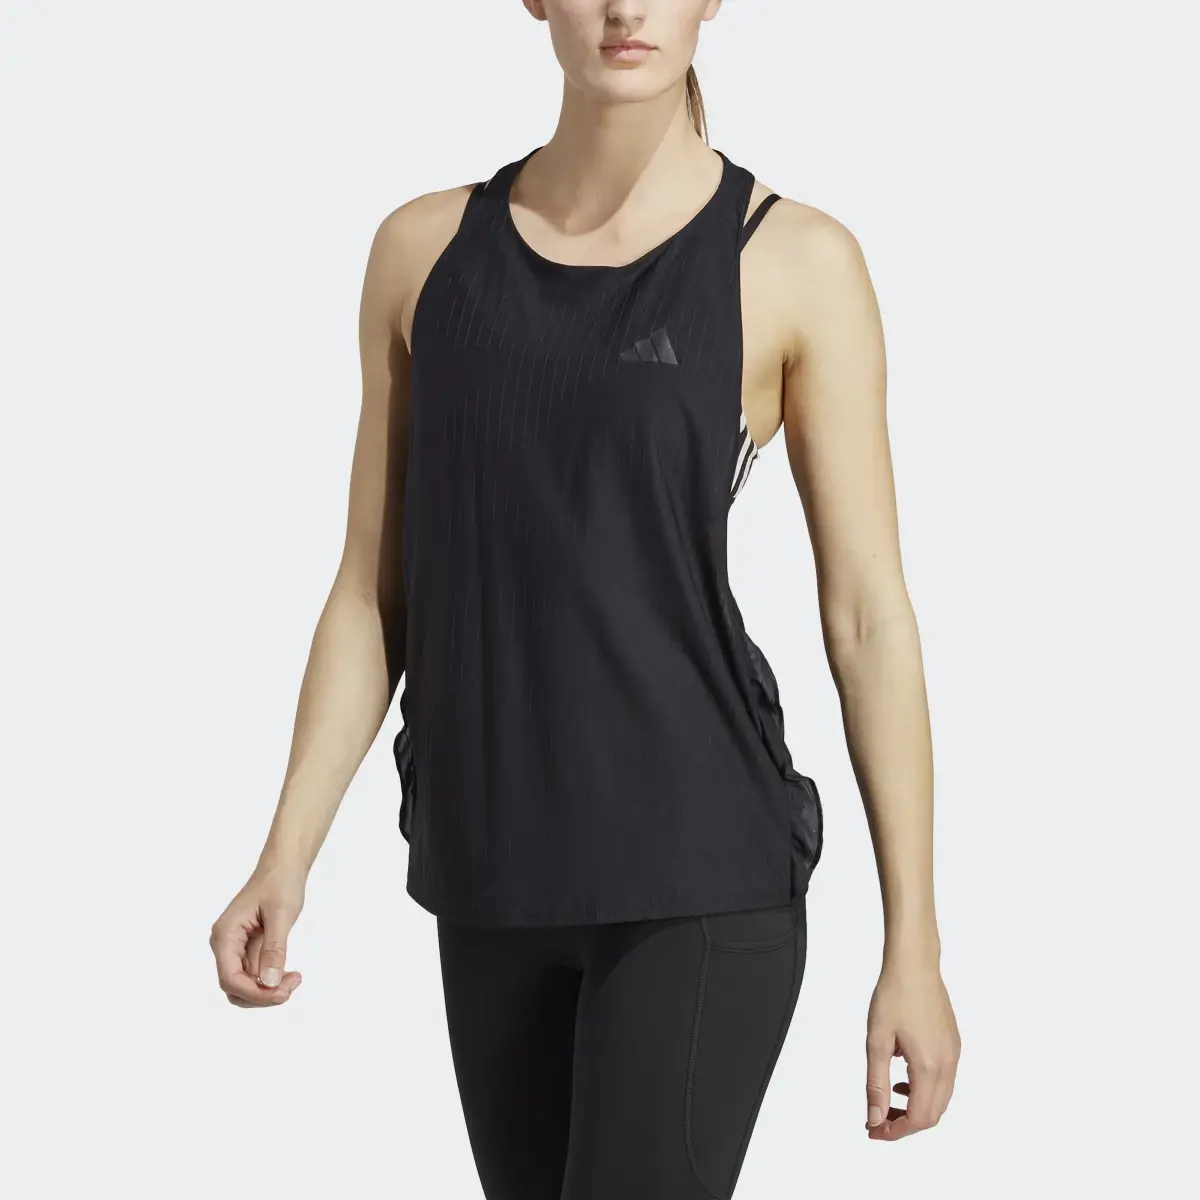 Adidas Made to be Remade Running Tank Top. 1